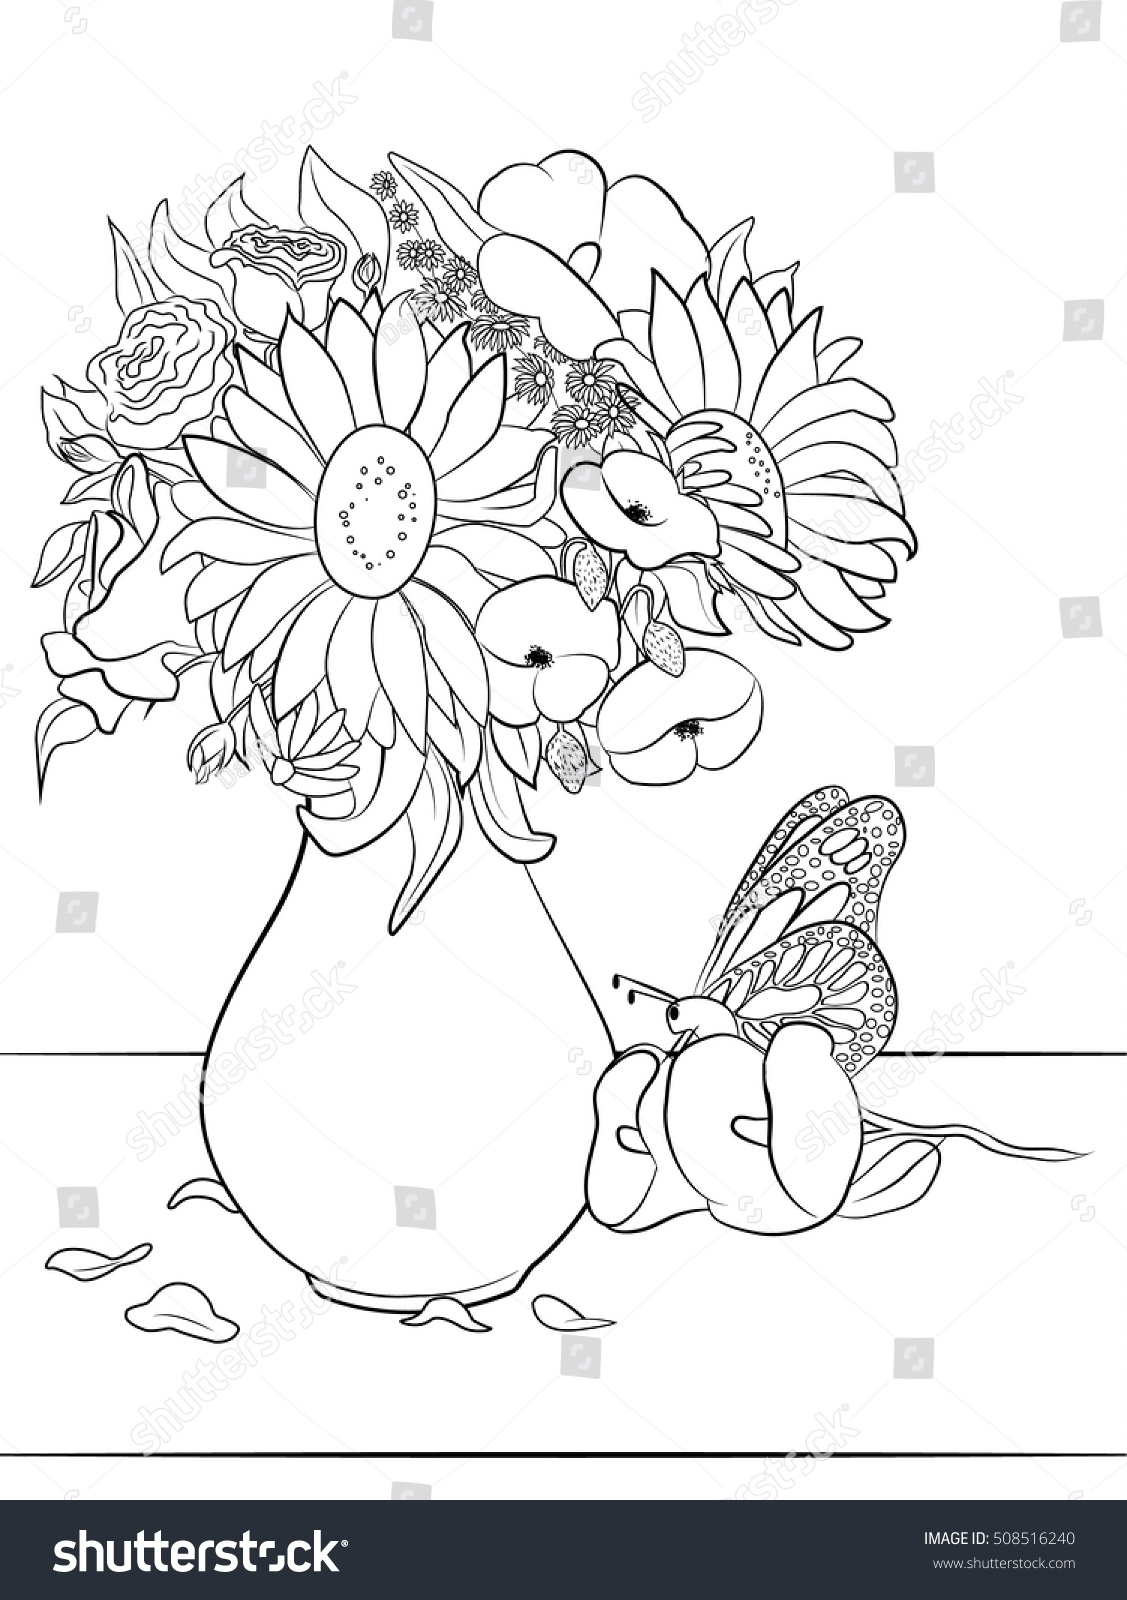 Vase Flowers Coloring Page Adults Kids Stock Vector Royalty Free ...